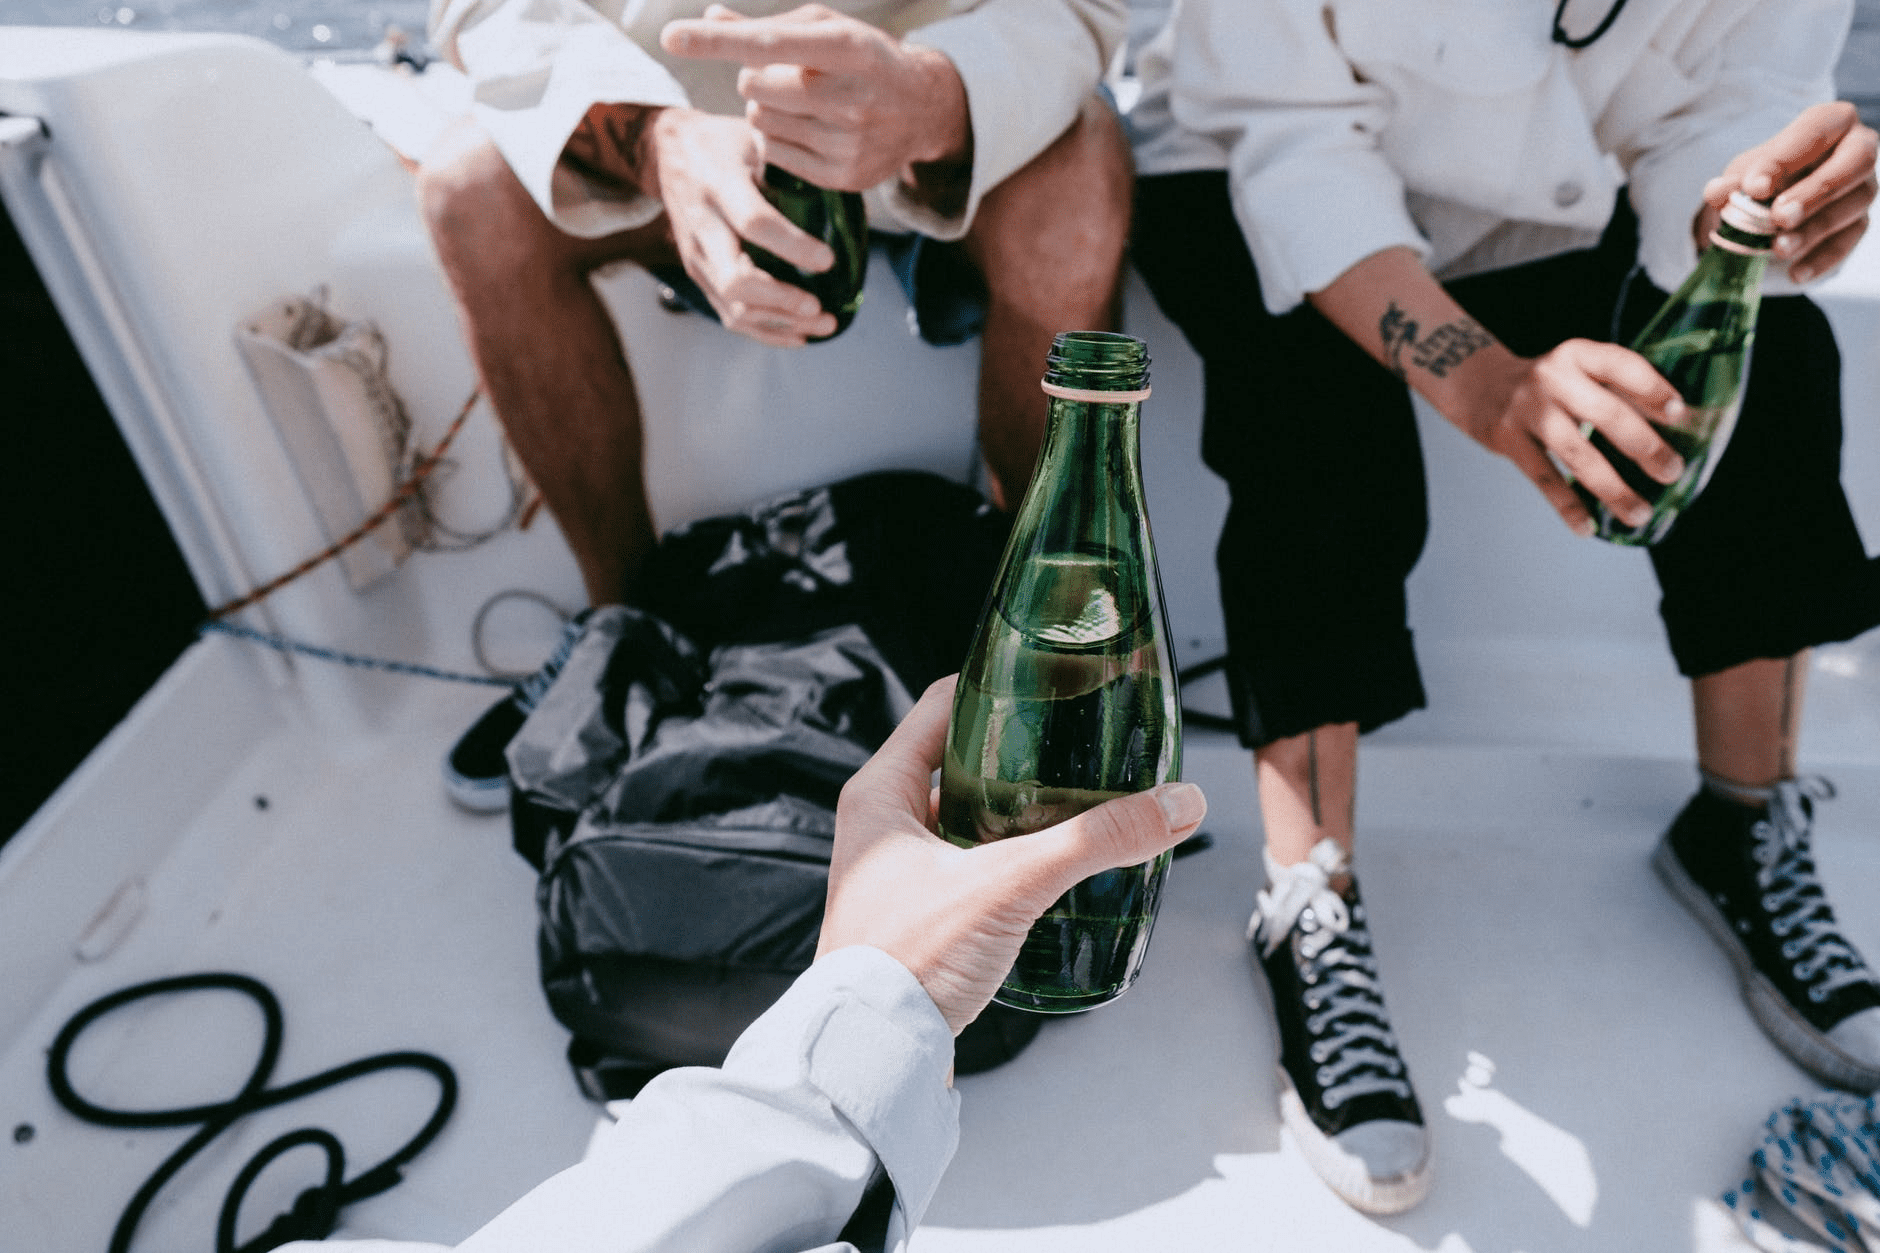 Boating Under the Influence in Florida